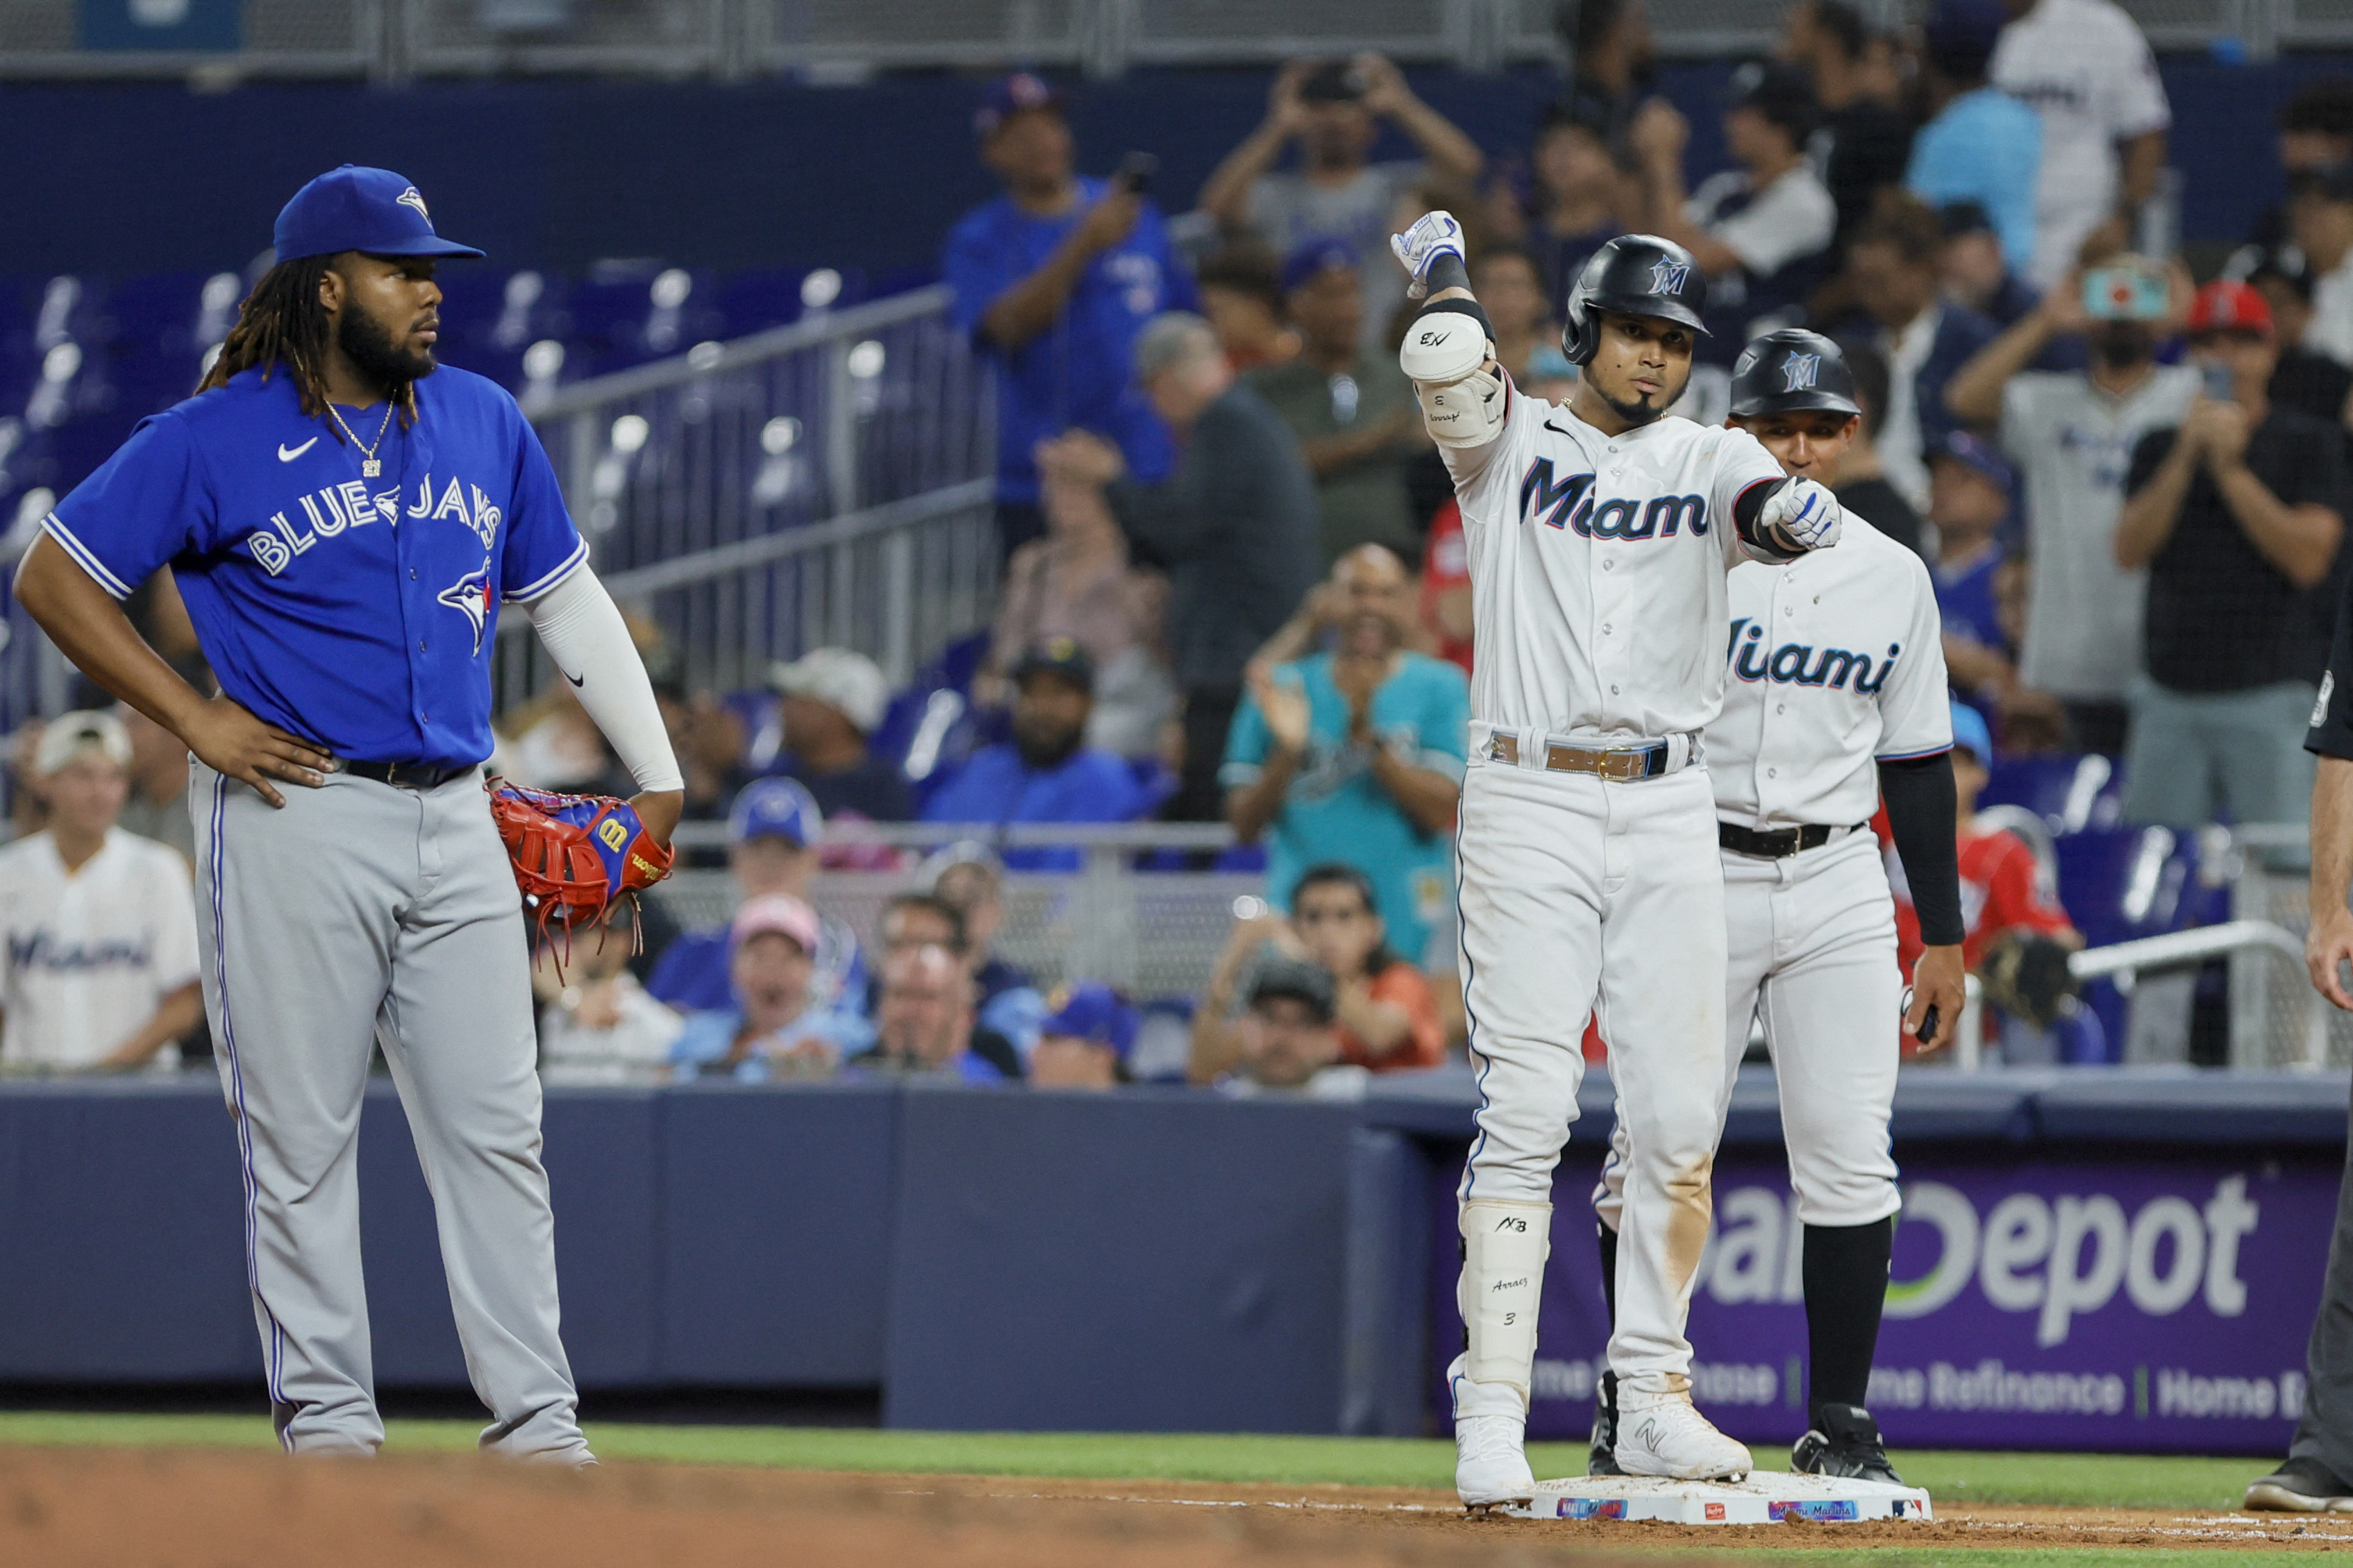 Luis Arraez goes 5 for 5 and lifts average to .400 as the Marlins rout the  Blue Jays 11-0 - NBC Sports